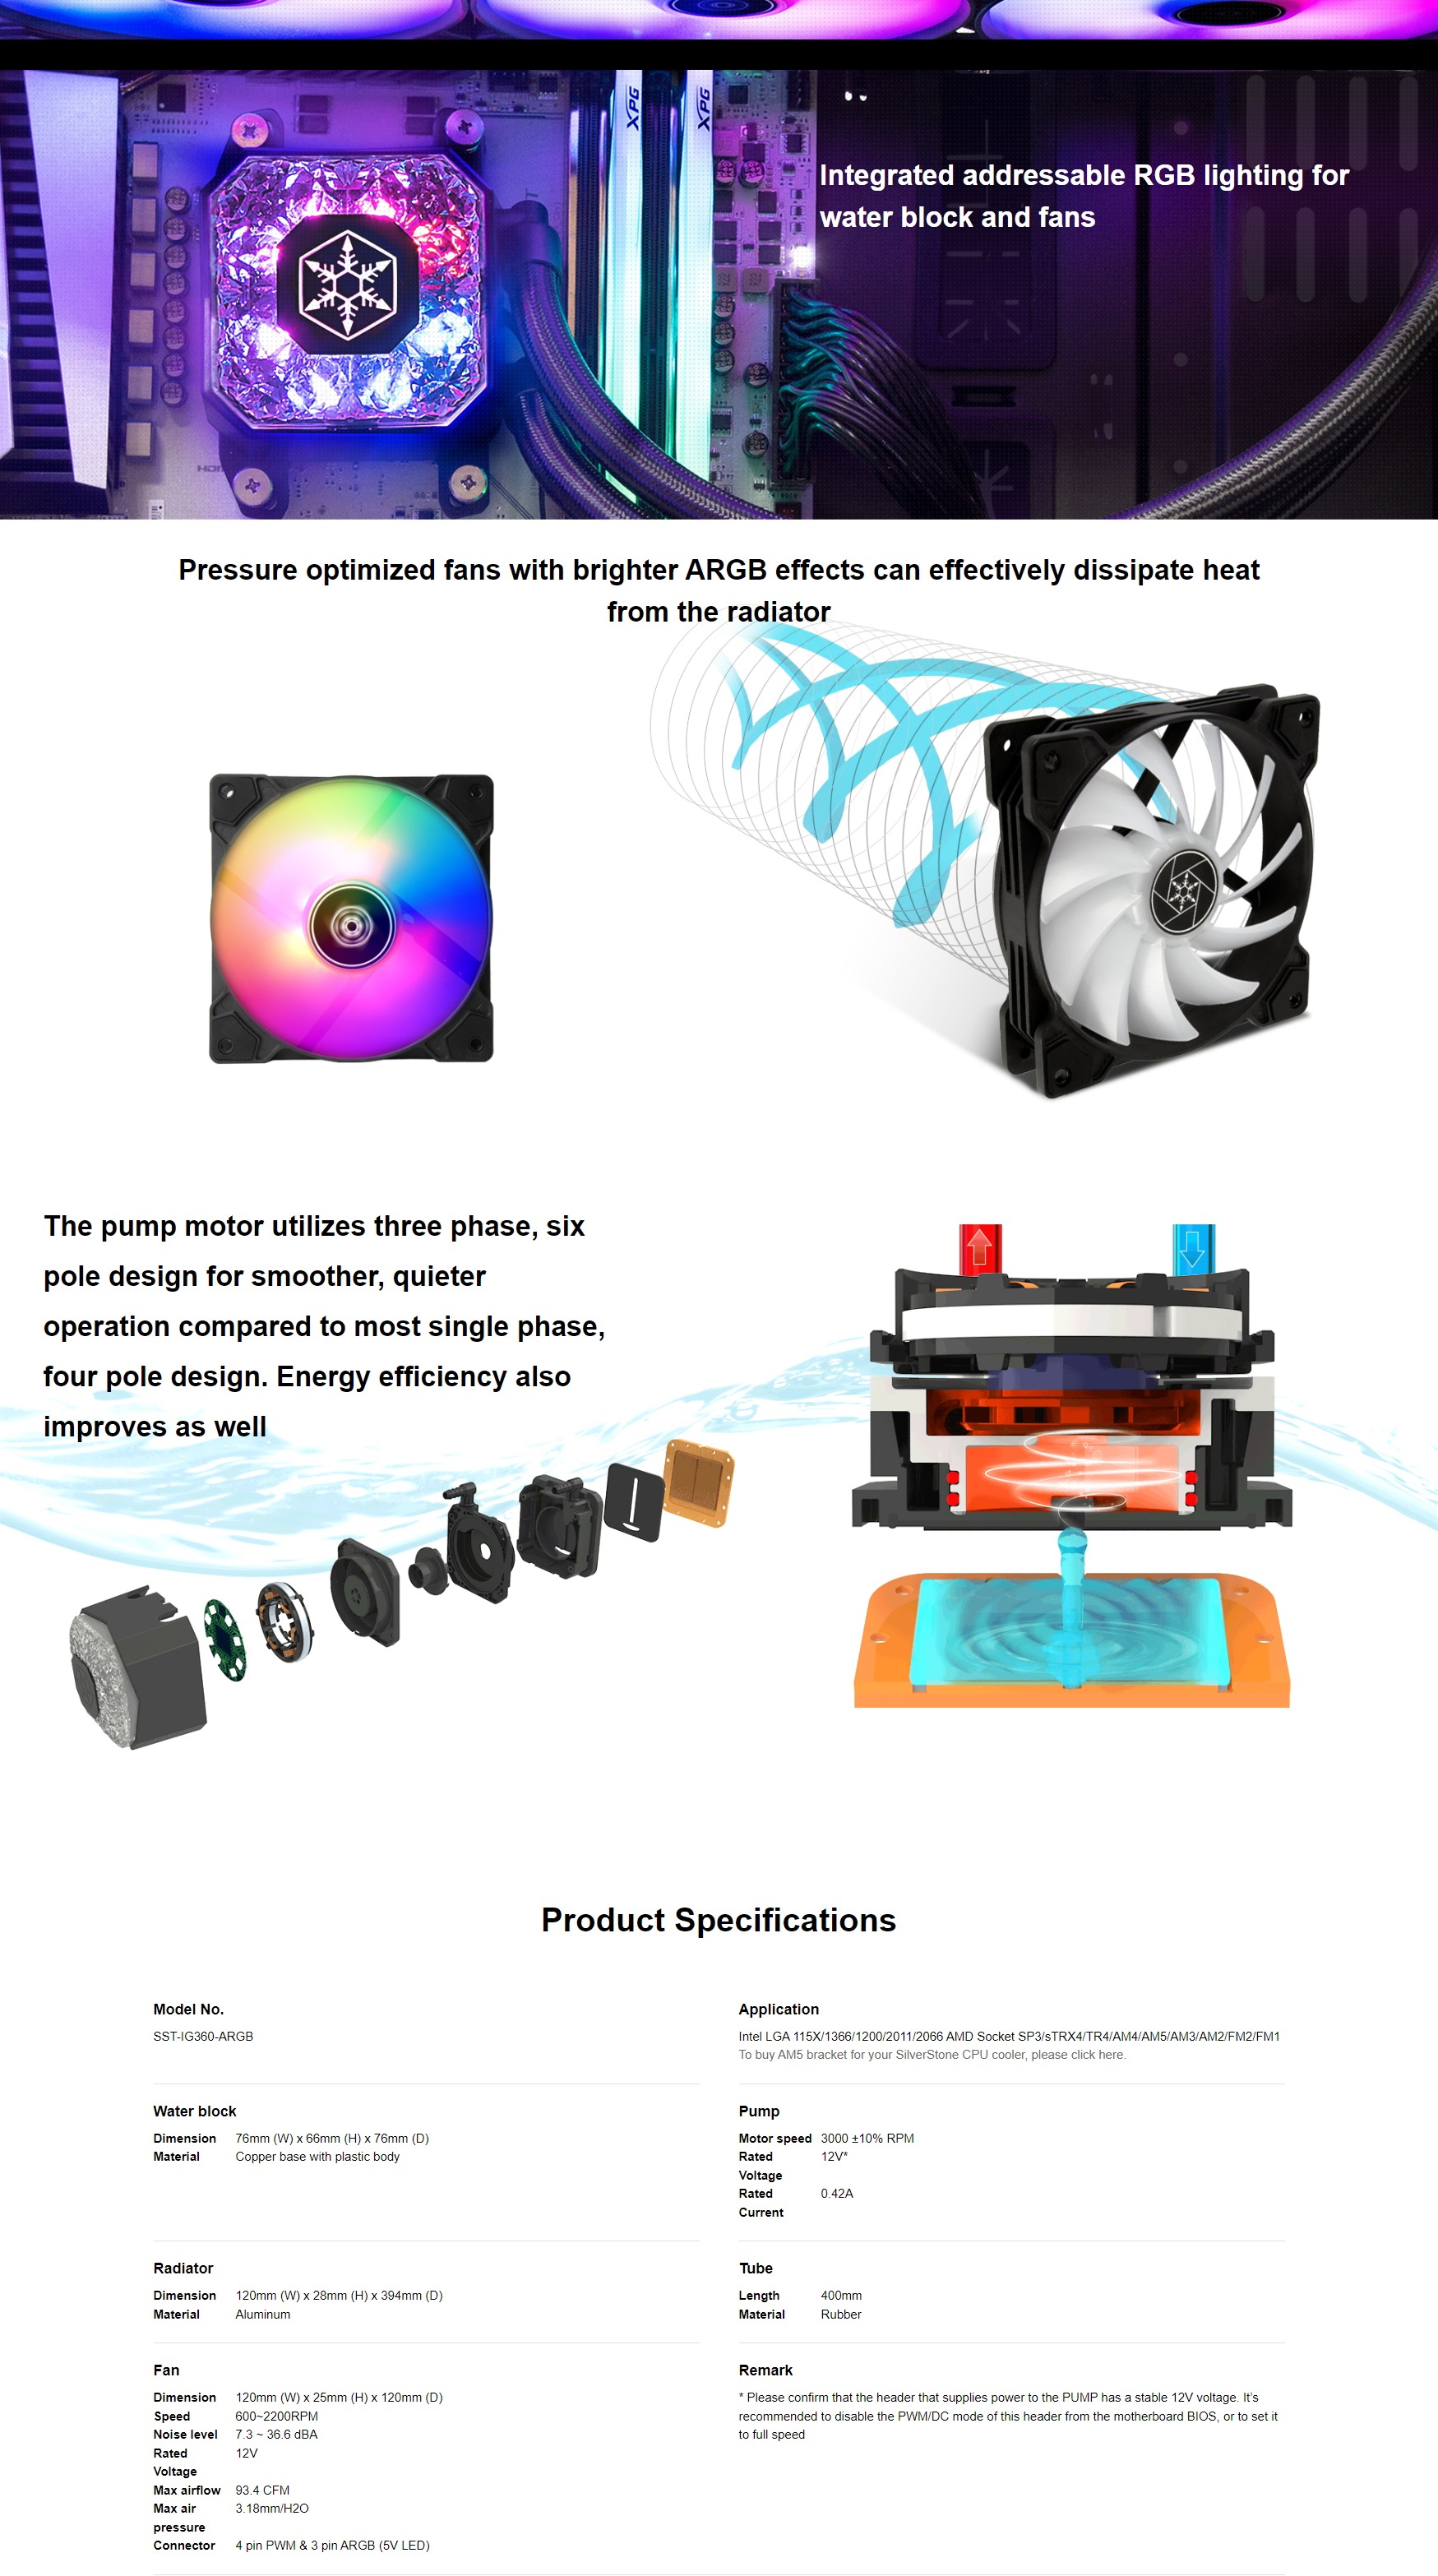 A large marketing image providing additional information about the product SilverStone IceGem 360P ARGB 360mm Liquid CPU Cooler - Black - Additional alt info not provided